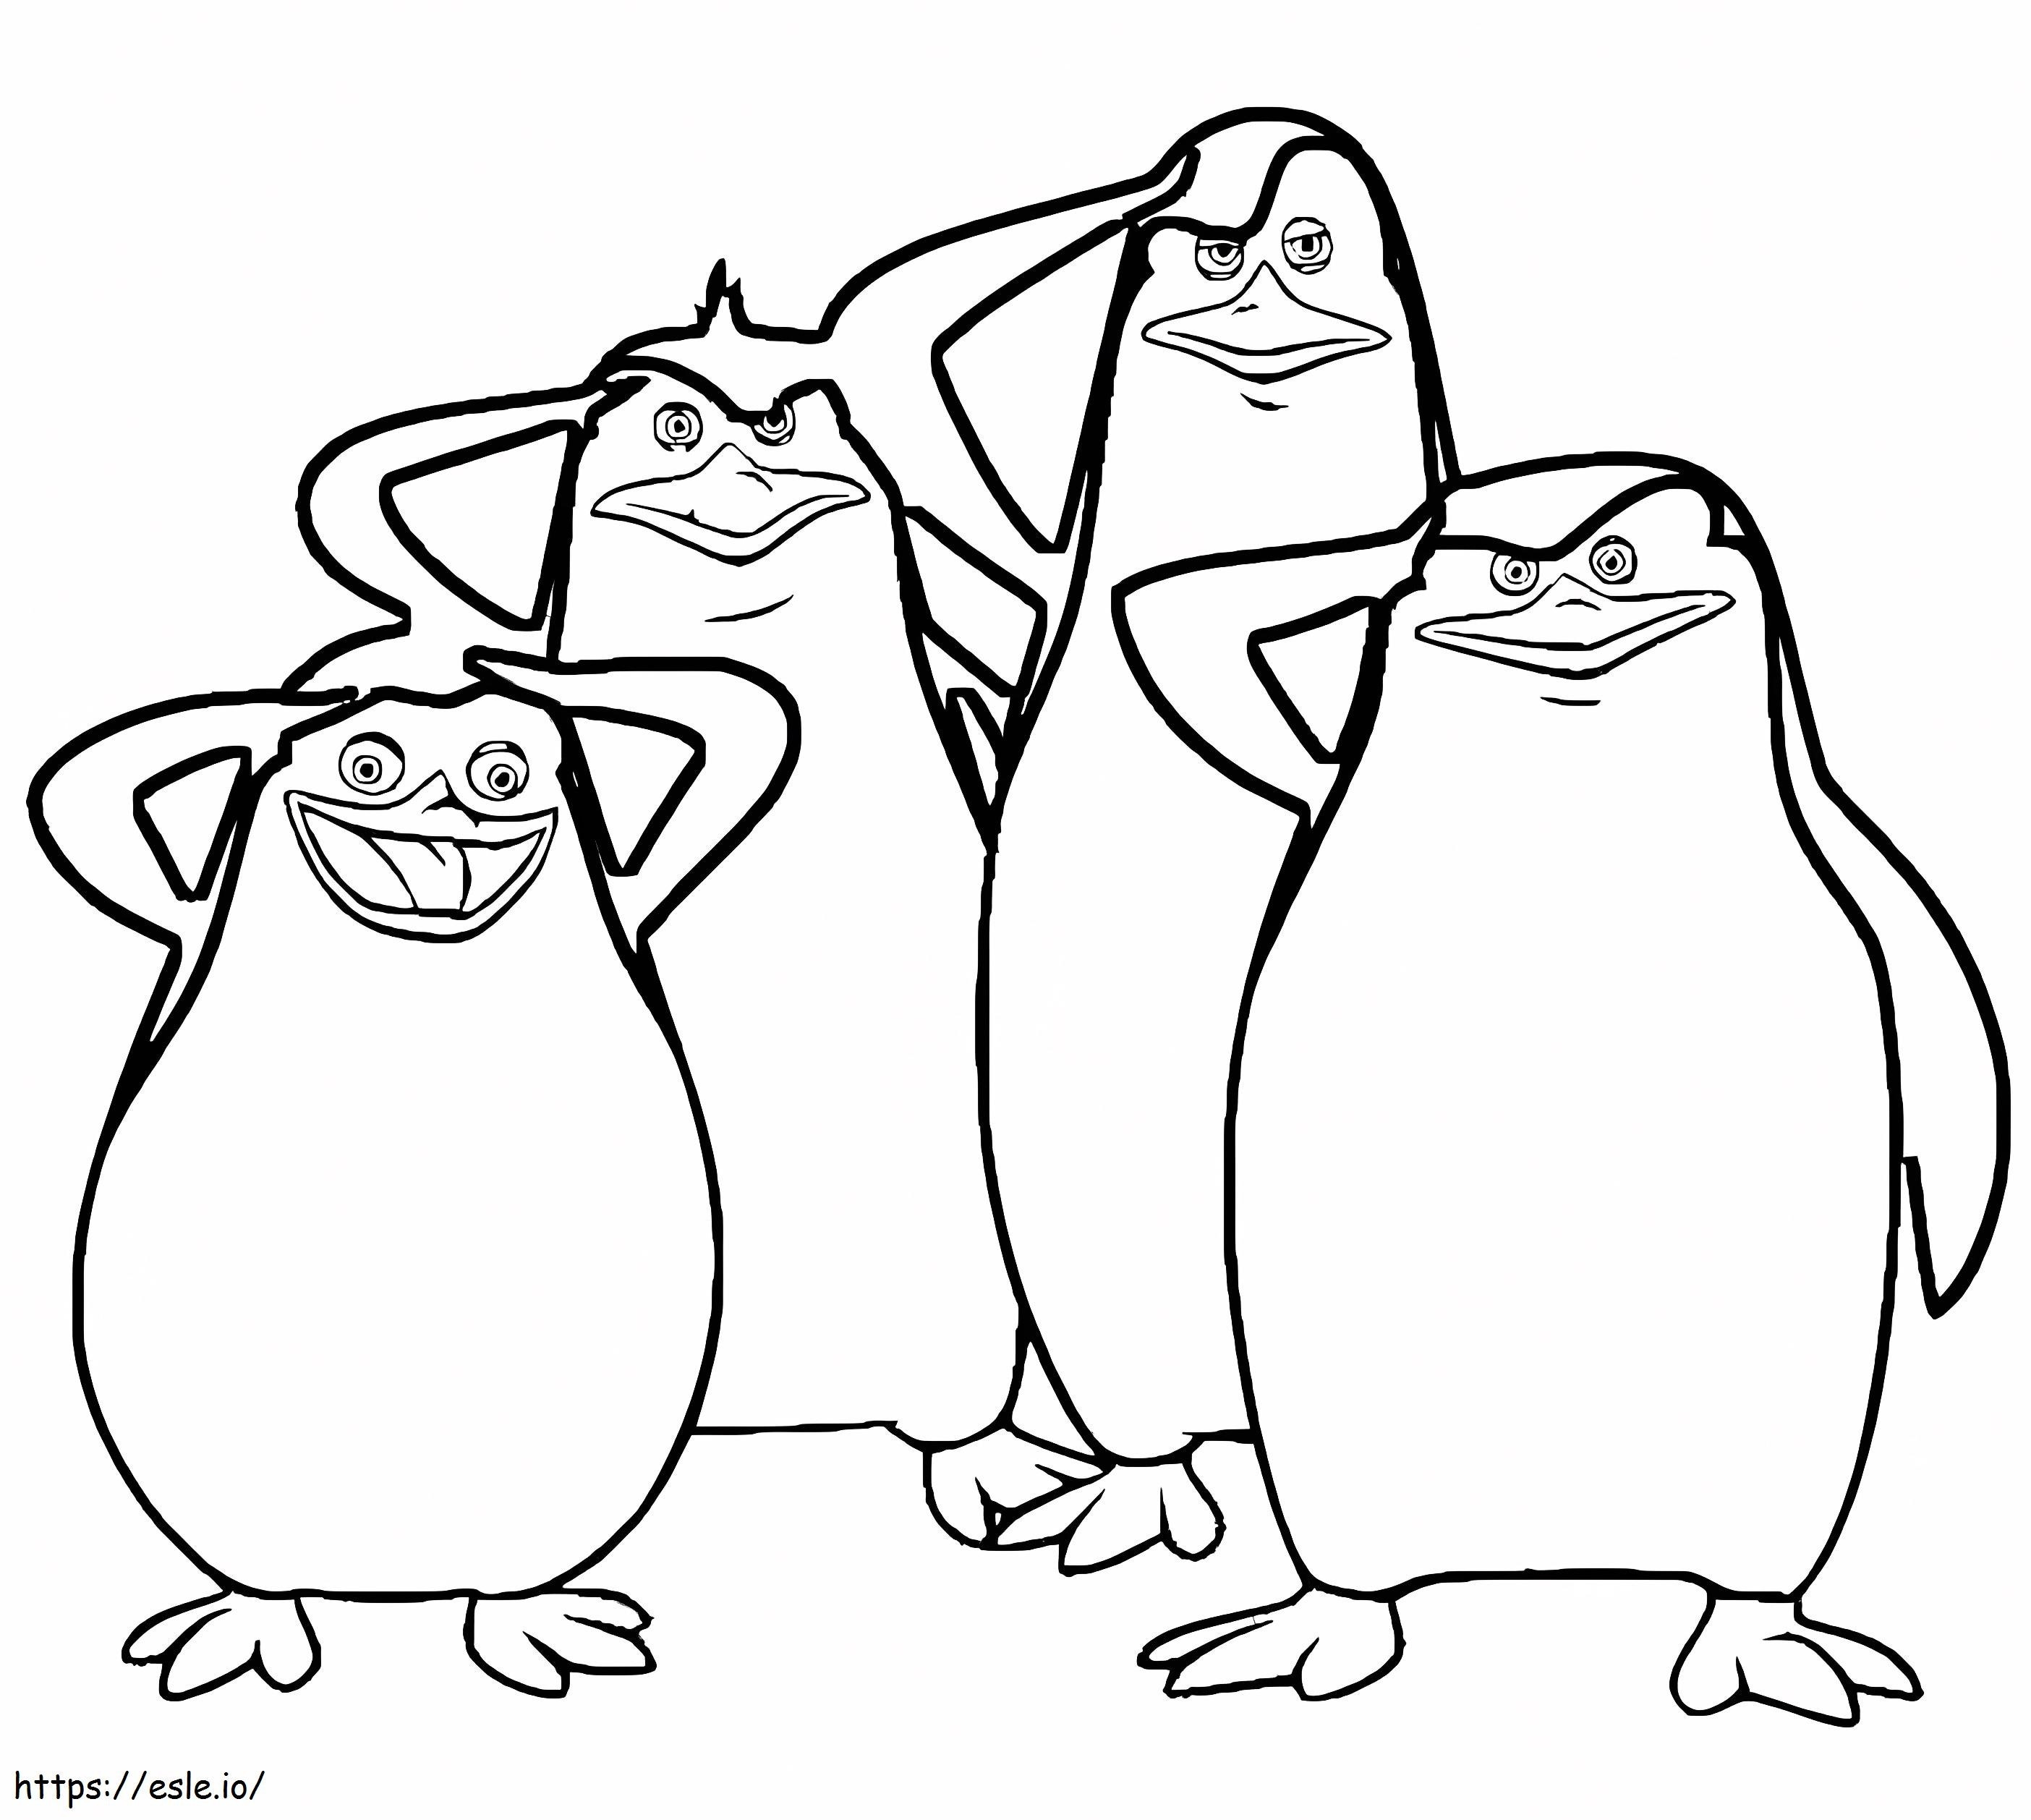 Amazing Penguins Of Madagascar coloring page